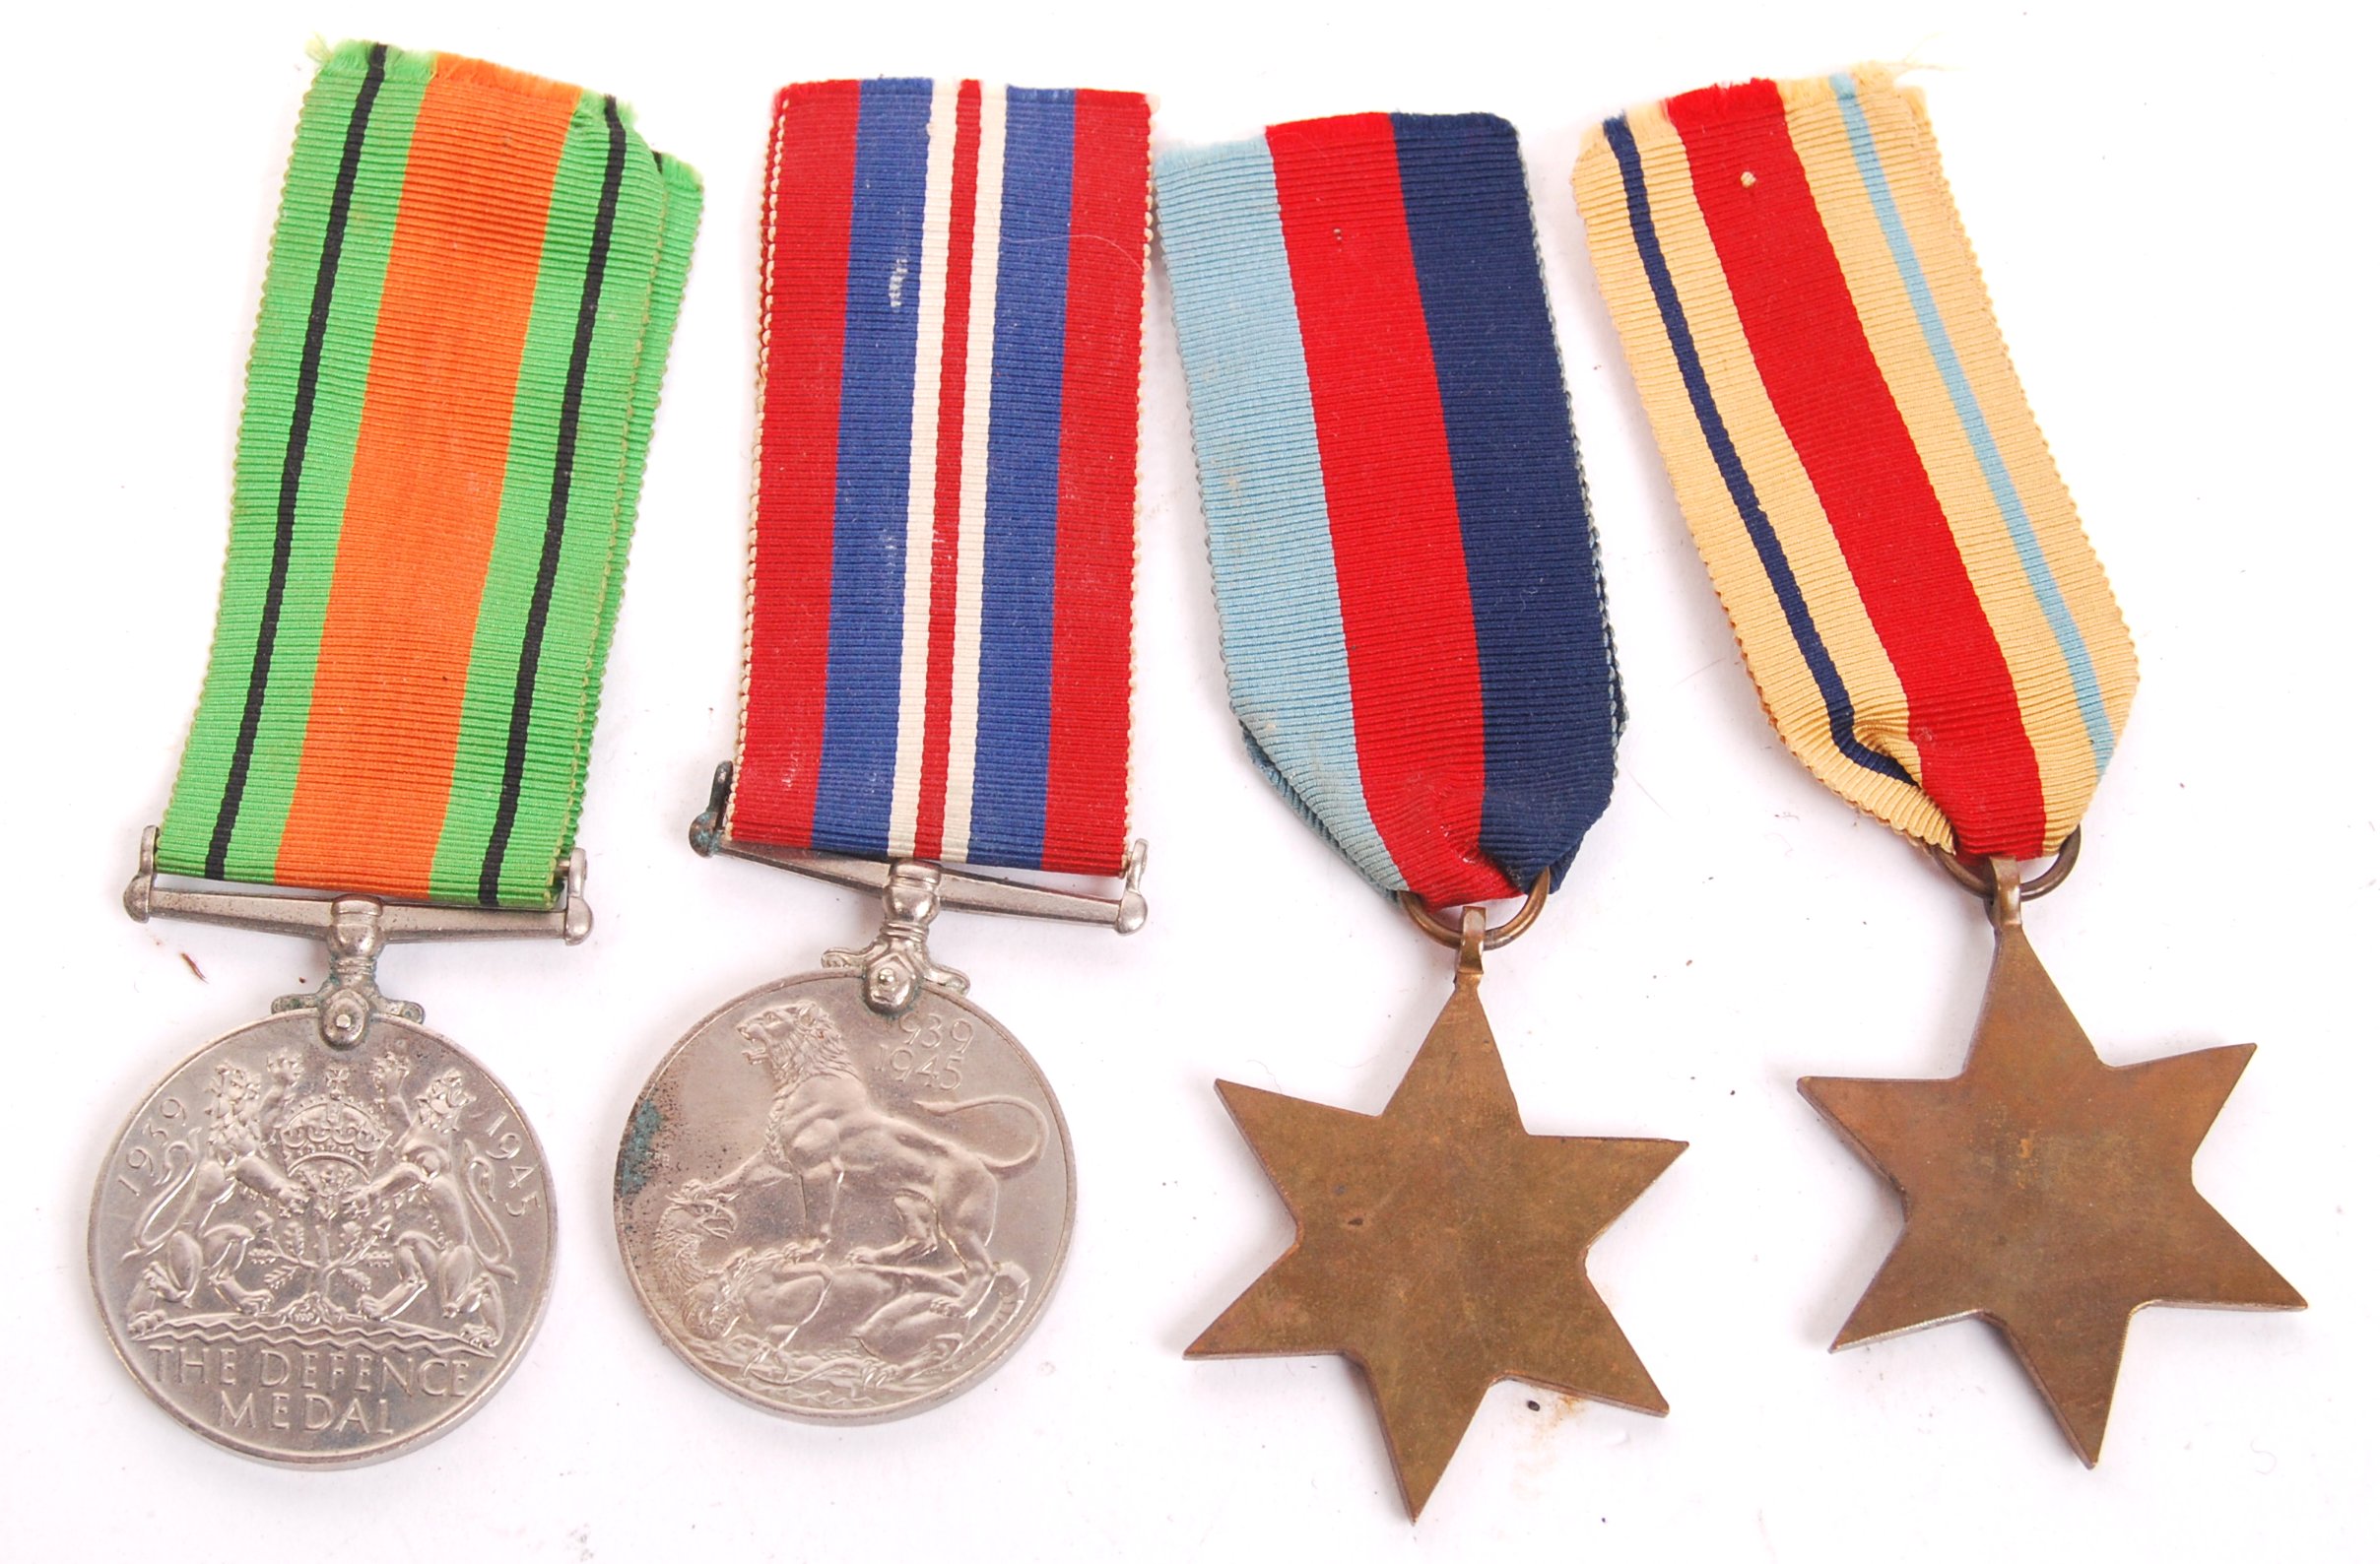 WWII SECOND WORLD WAR MEDAL GROUP - Image 3 of 3